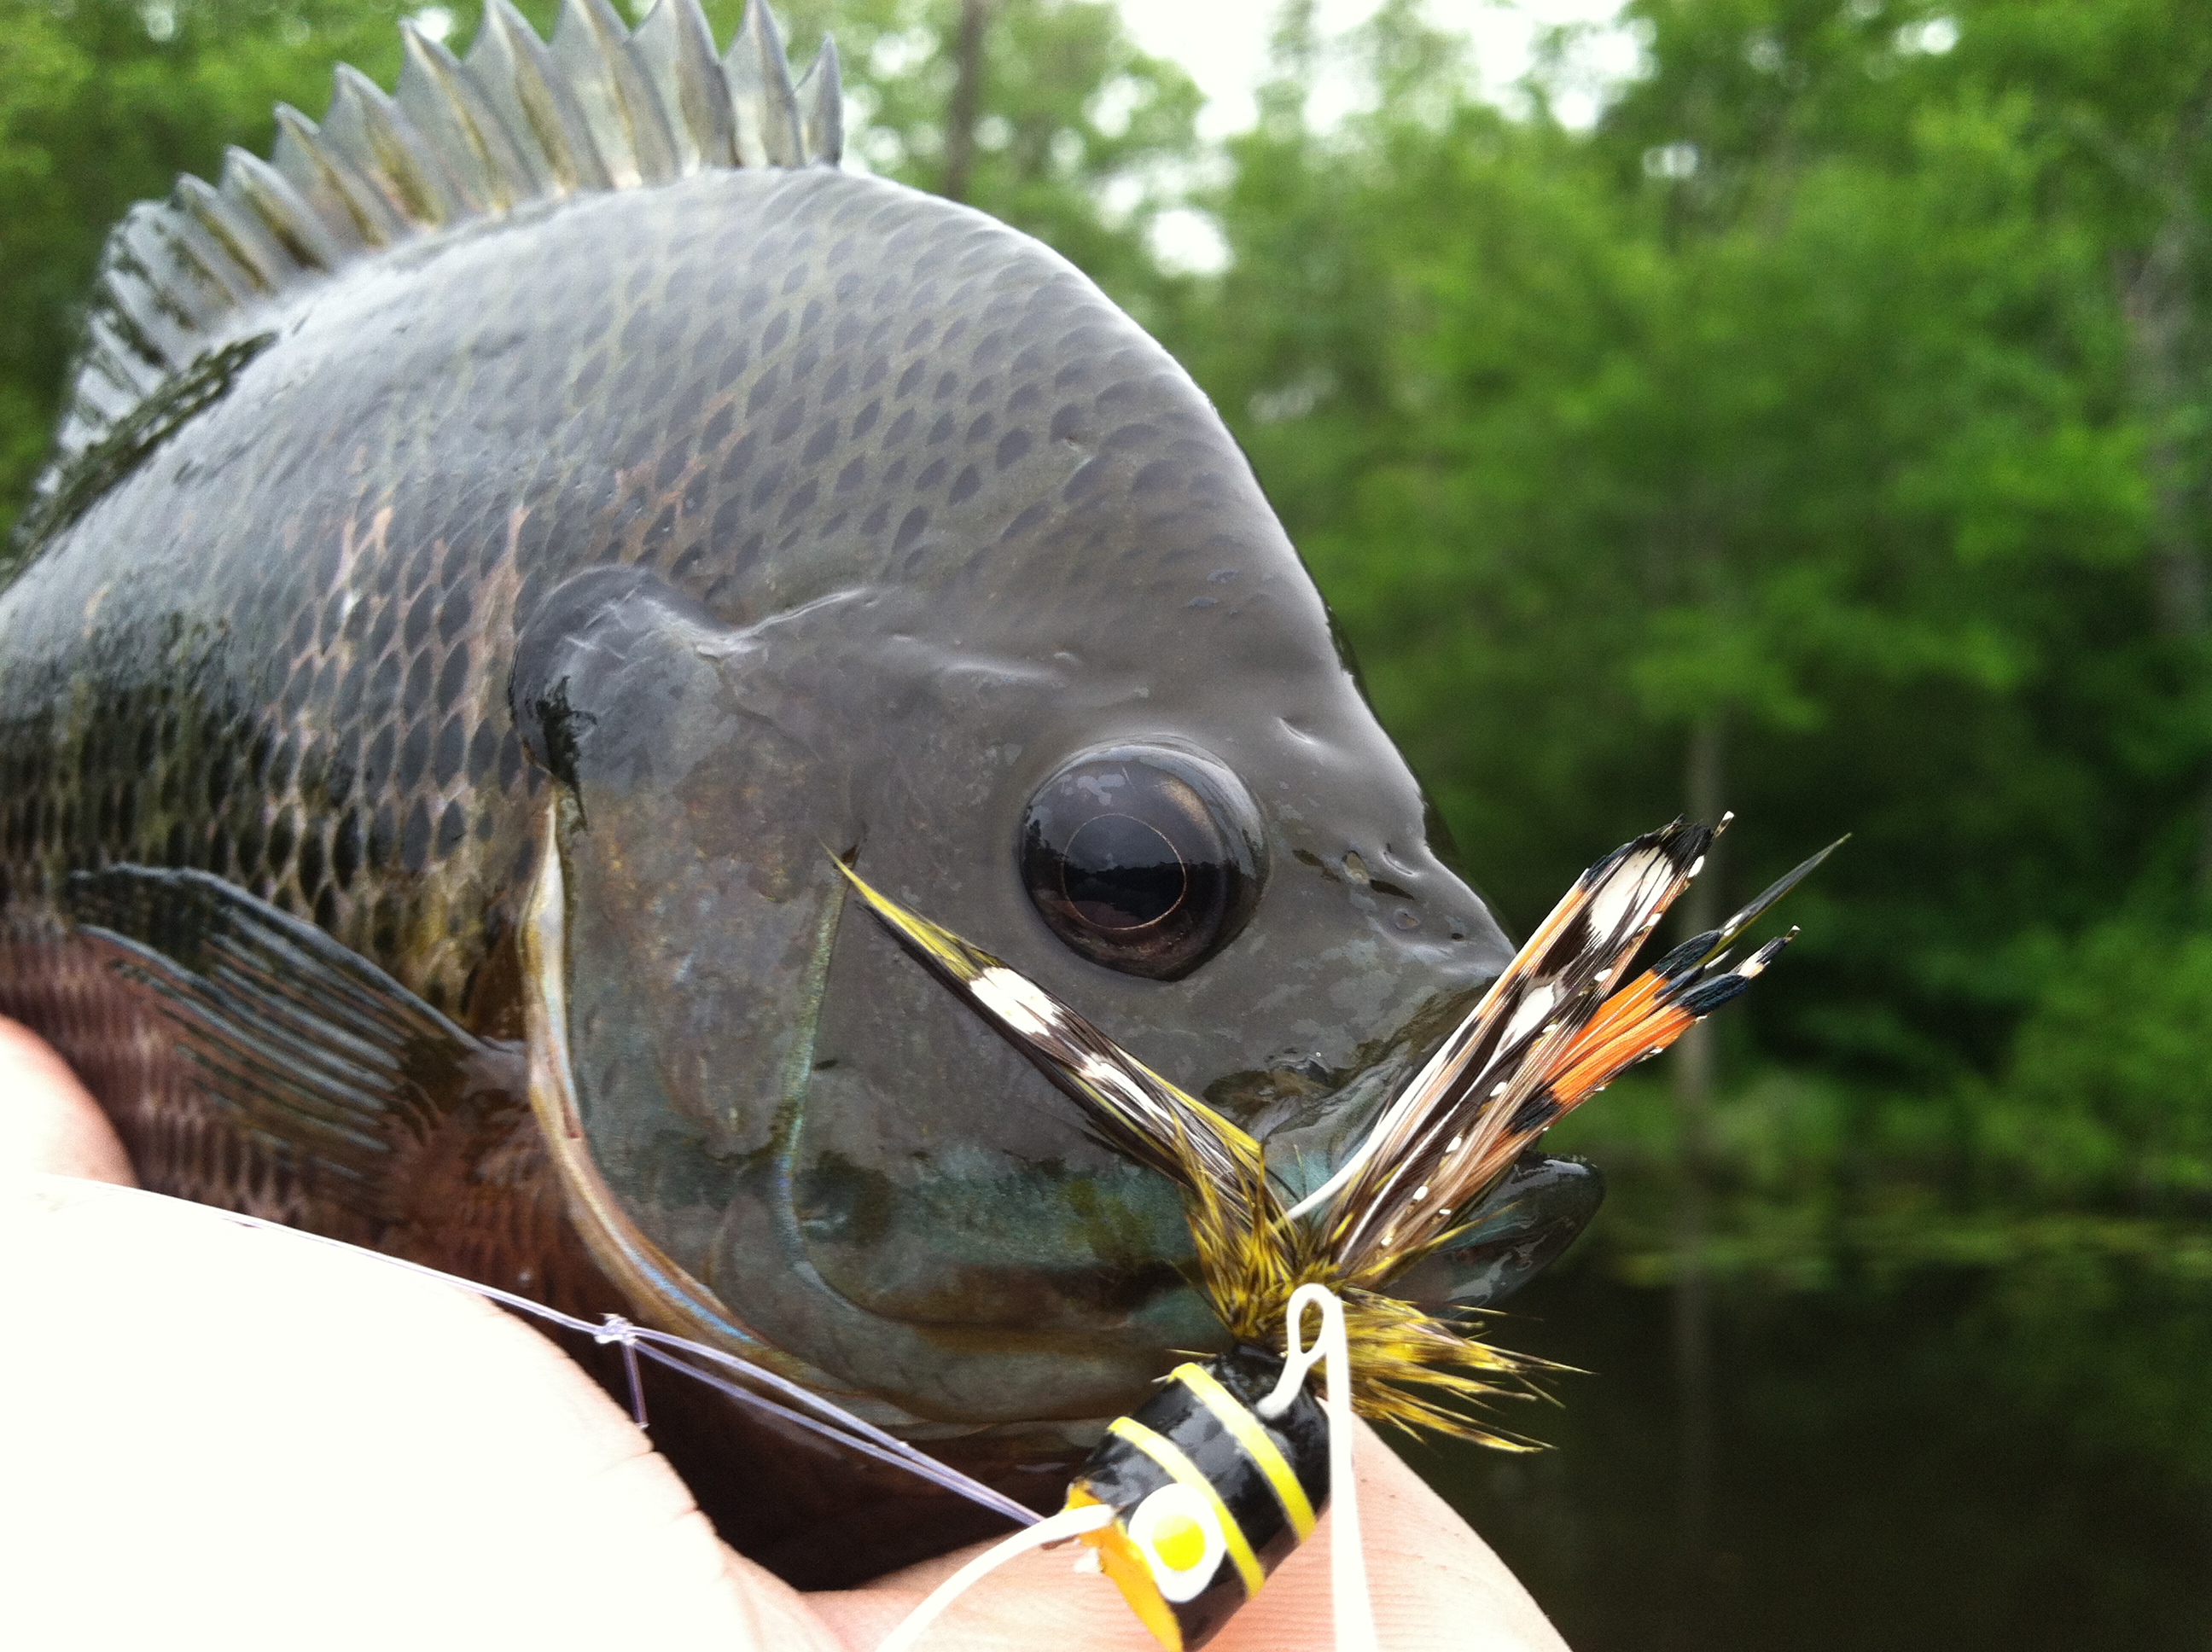 Fly rods, popping bugs and bluegill are summer staples for Carolinas anglers